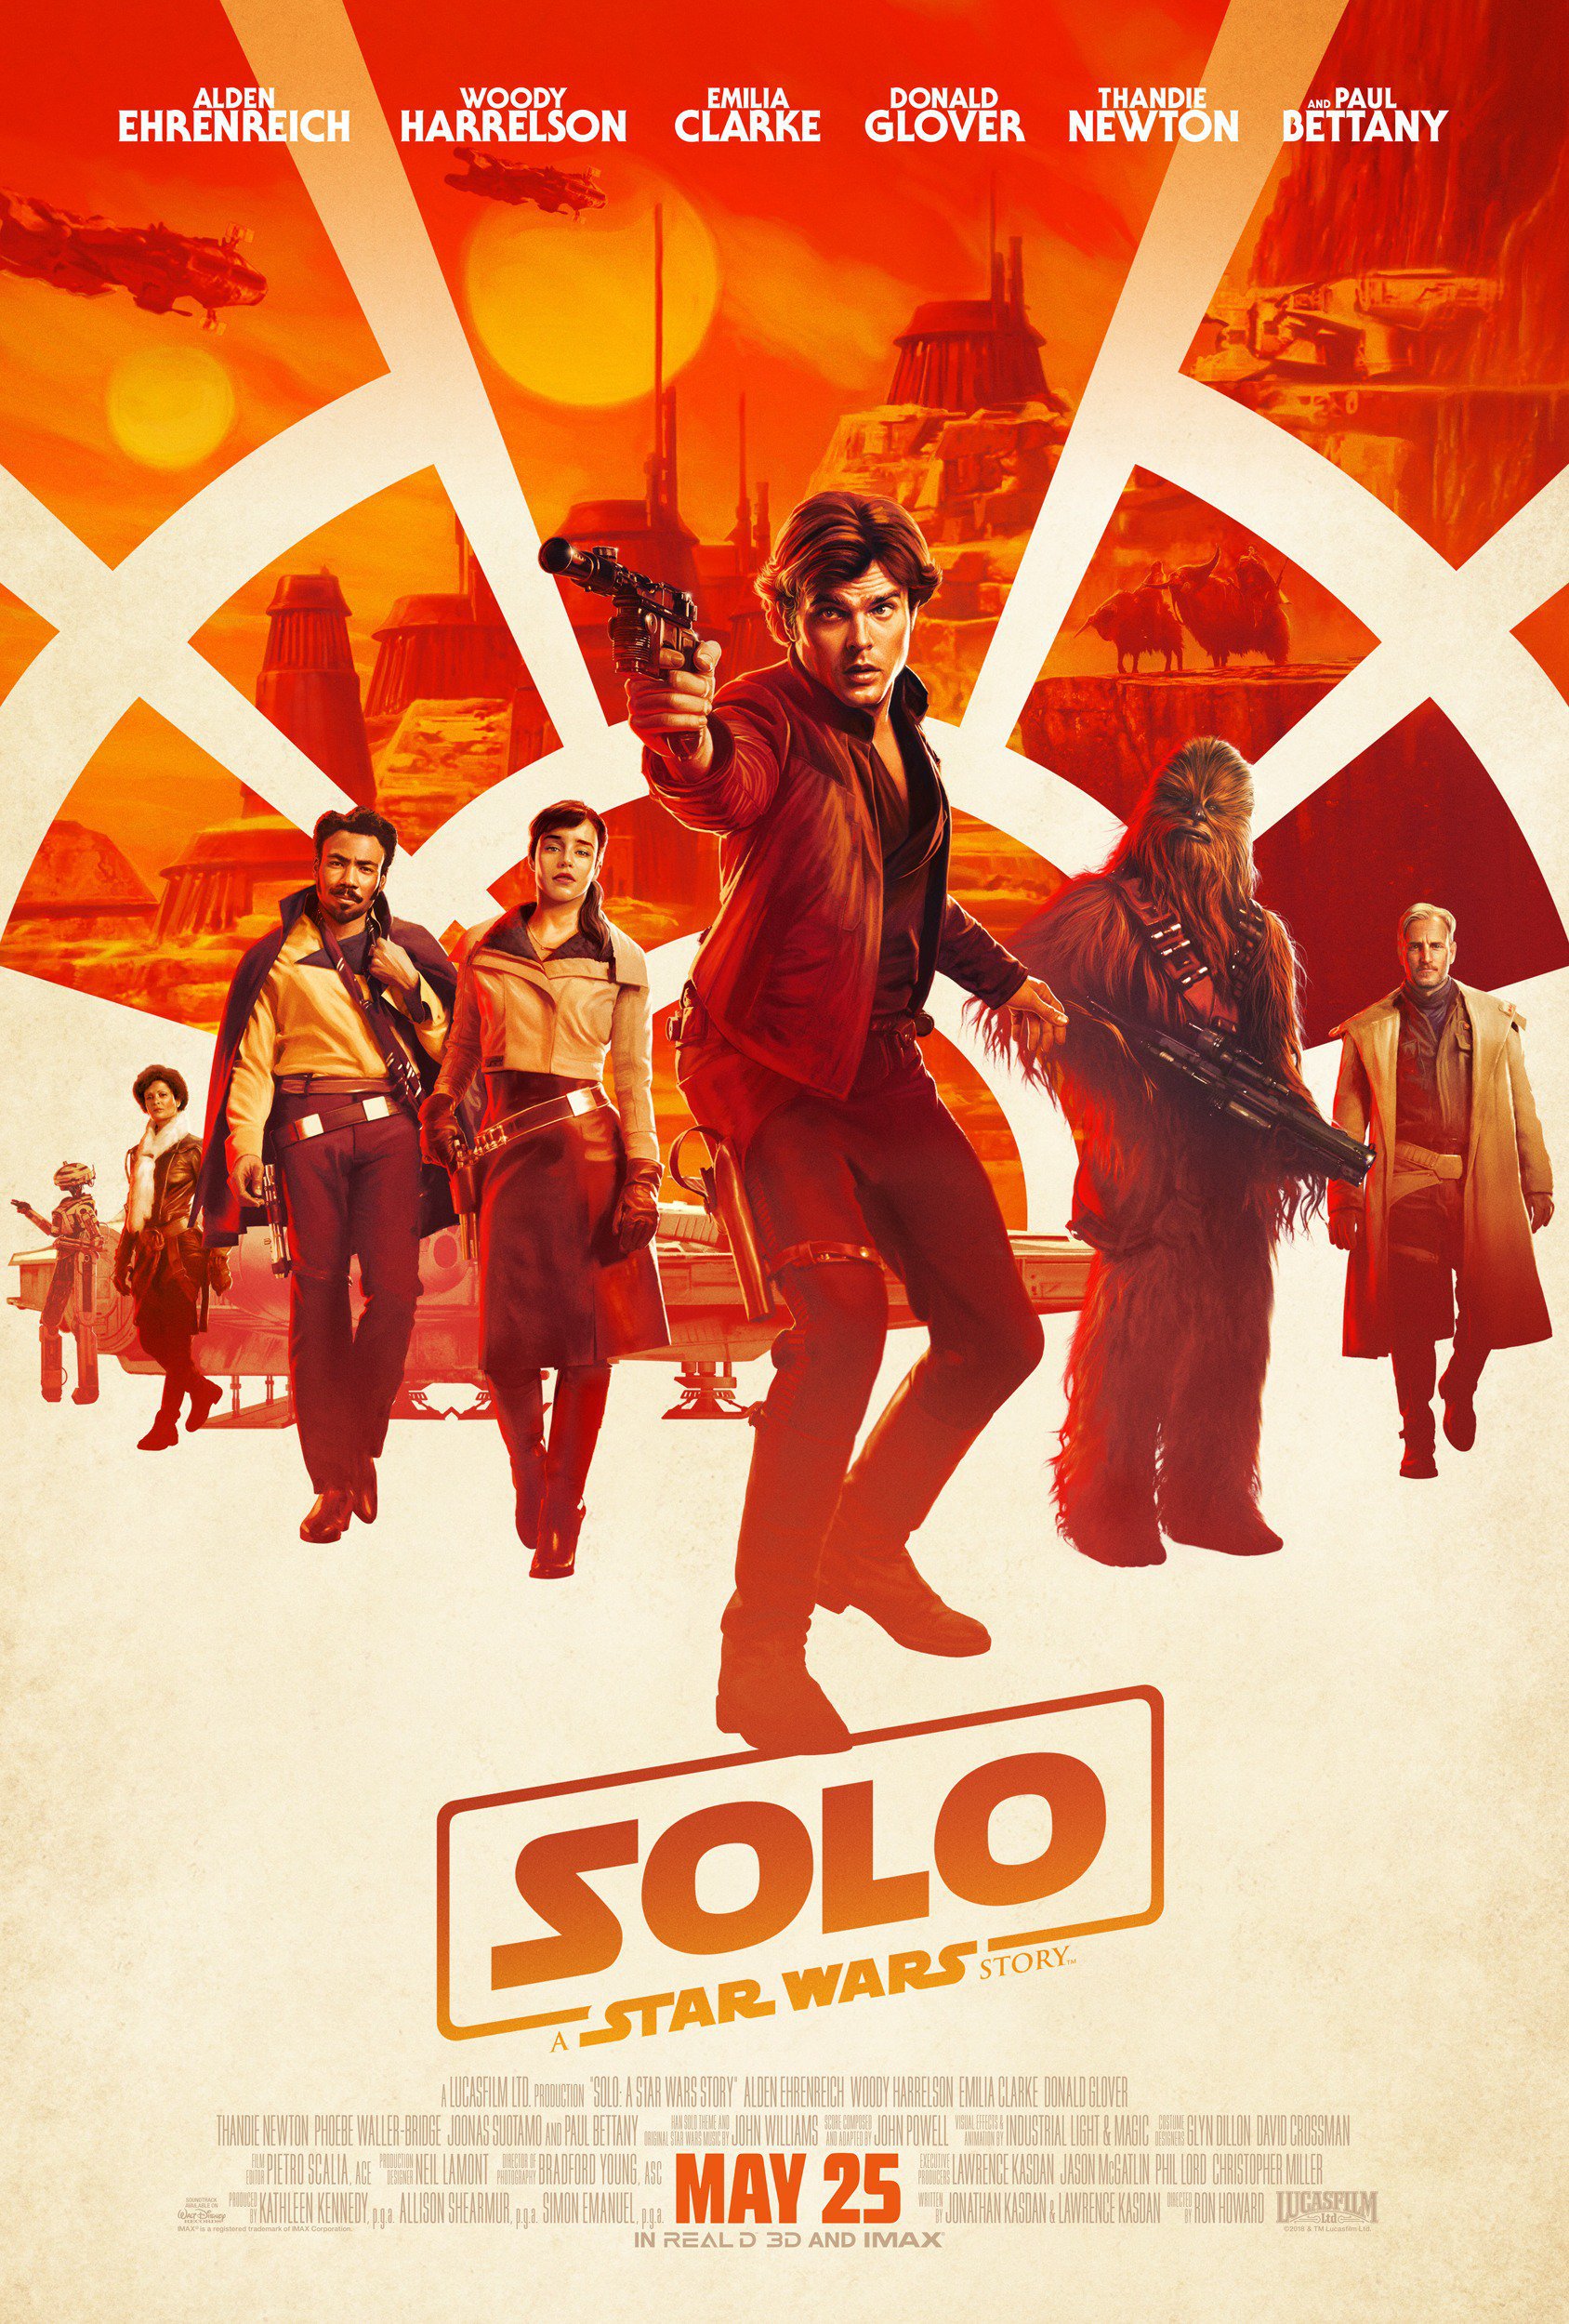 han solo poster